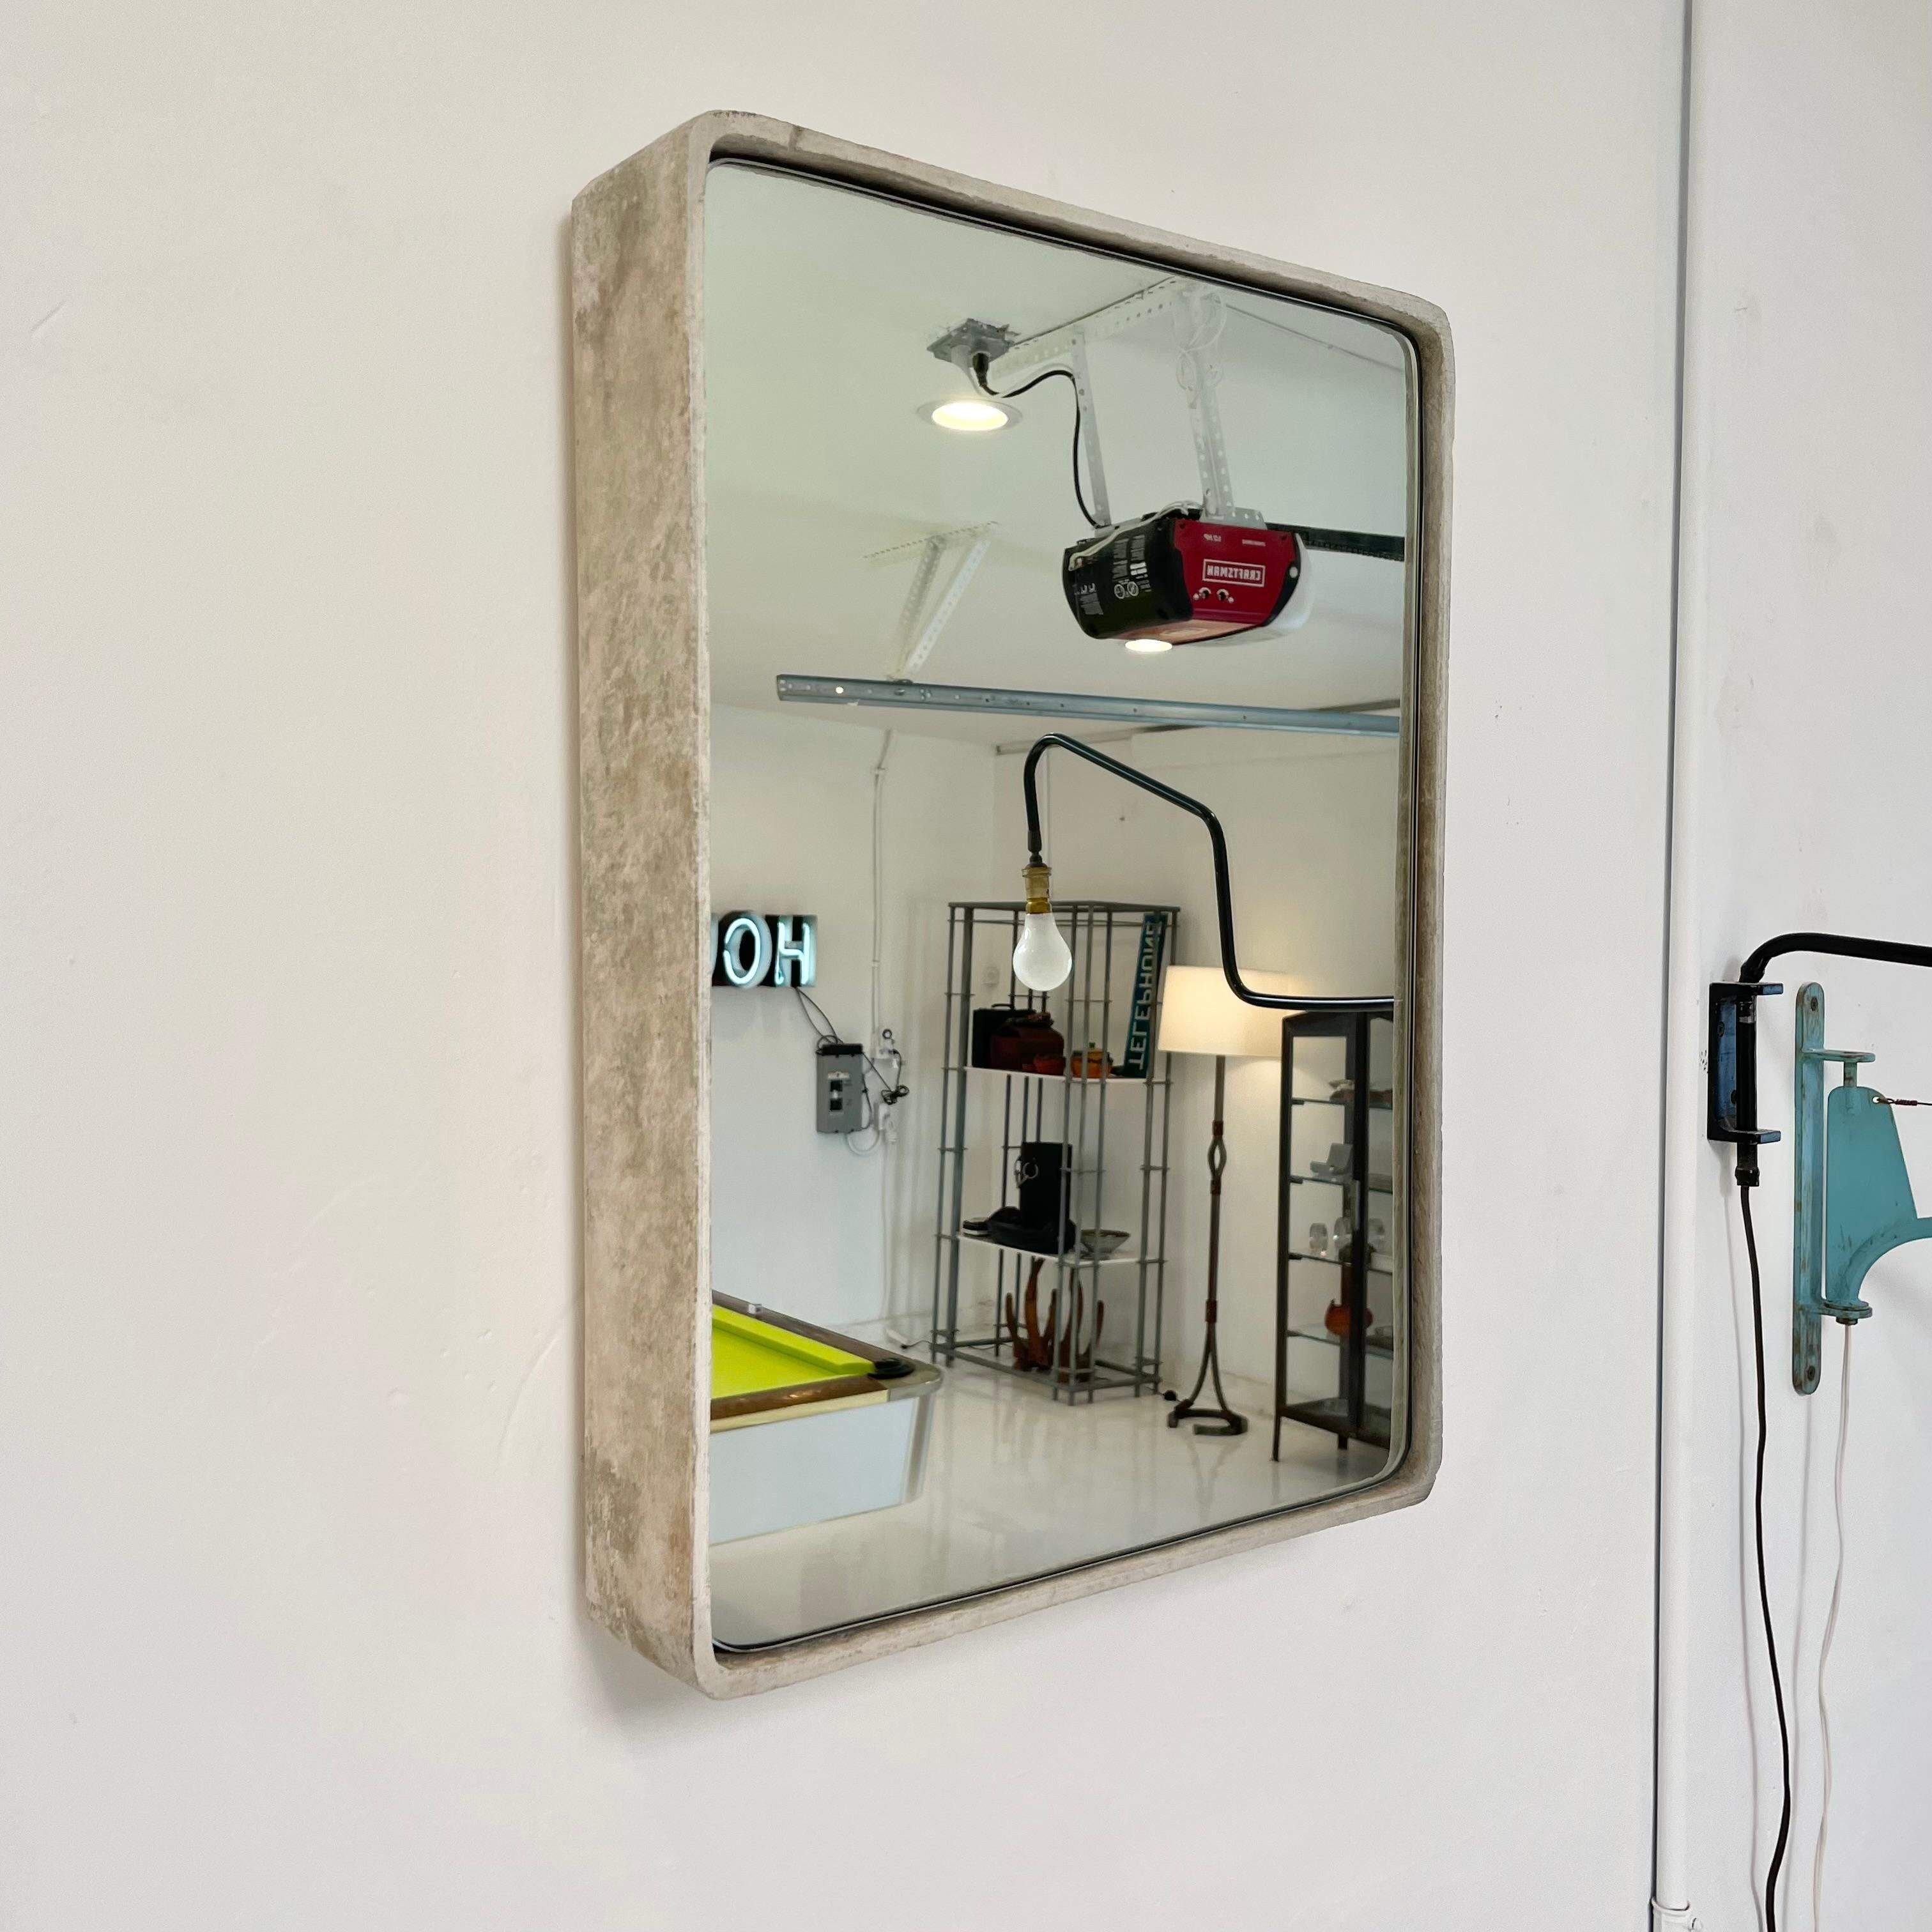 Gorgeous rectangular Willy Guhl concrete mirror. Concrete vessel originally produced at the Eternit factory in Switzerland in the 1960’s and mirror was professionally hand cut and added recently. Beautiful patina as expected with age featuring